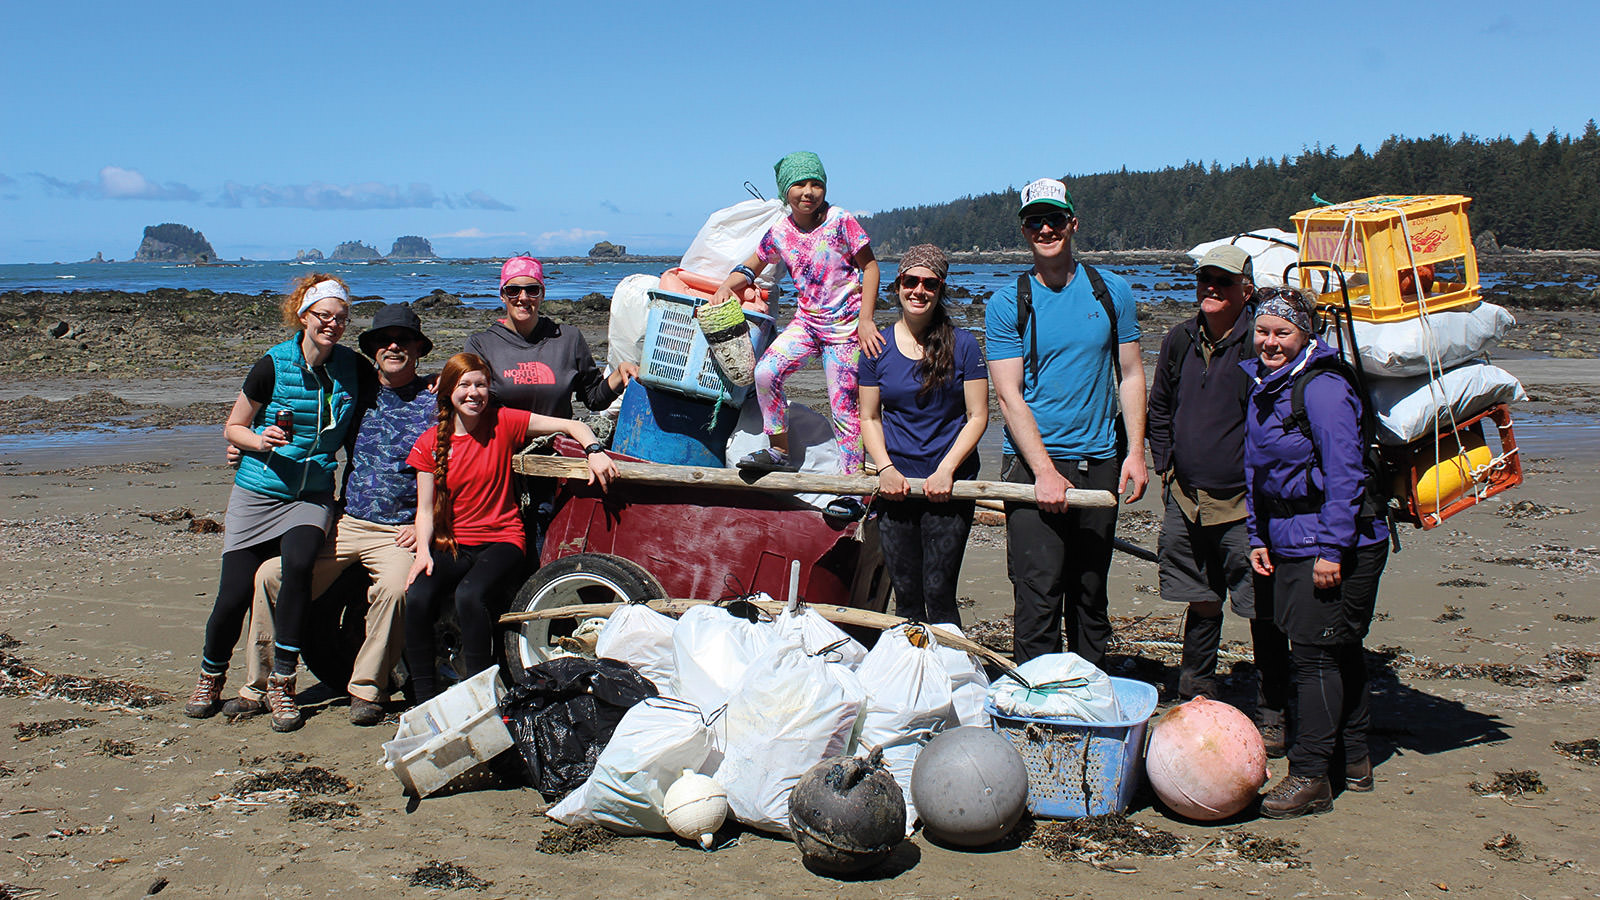 volunteers pose for a picture next to the trash they cleaned up from the beach